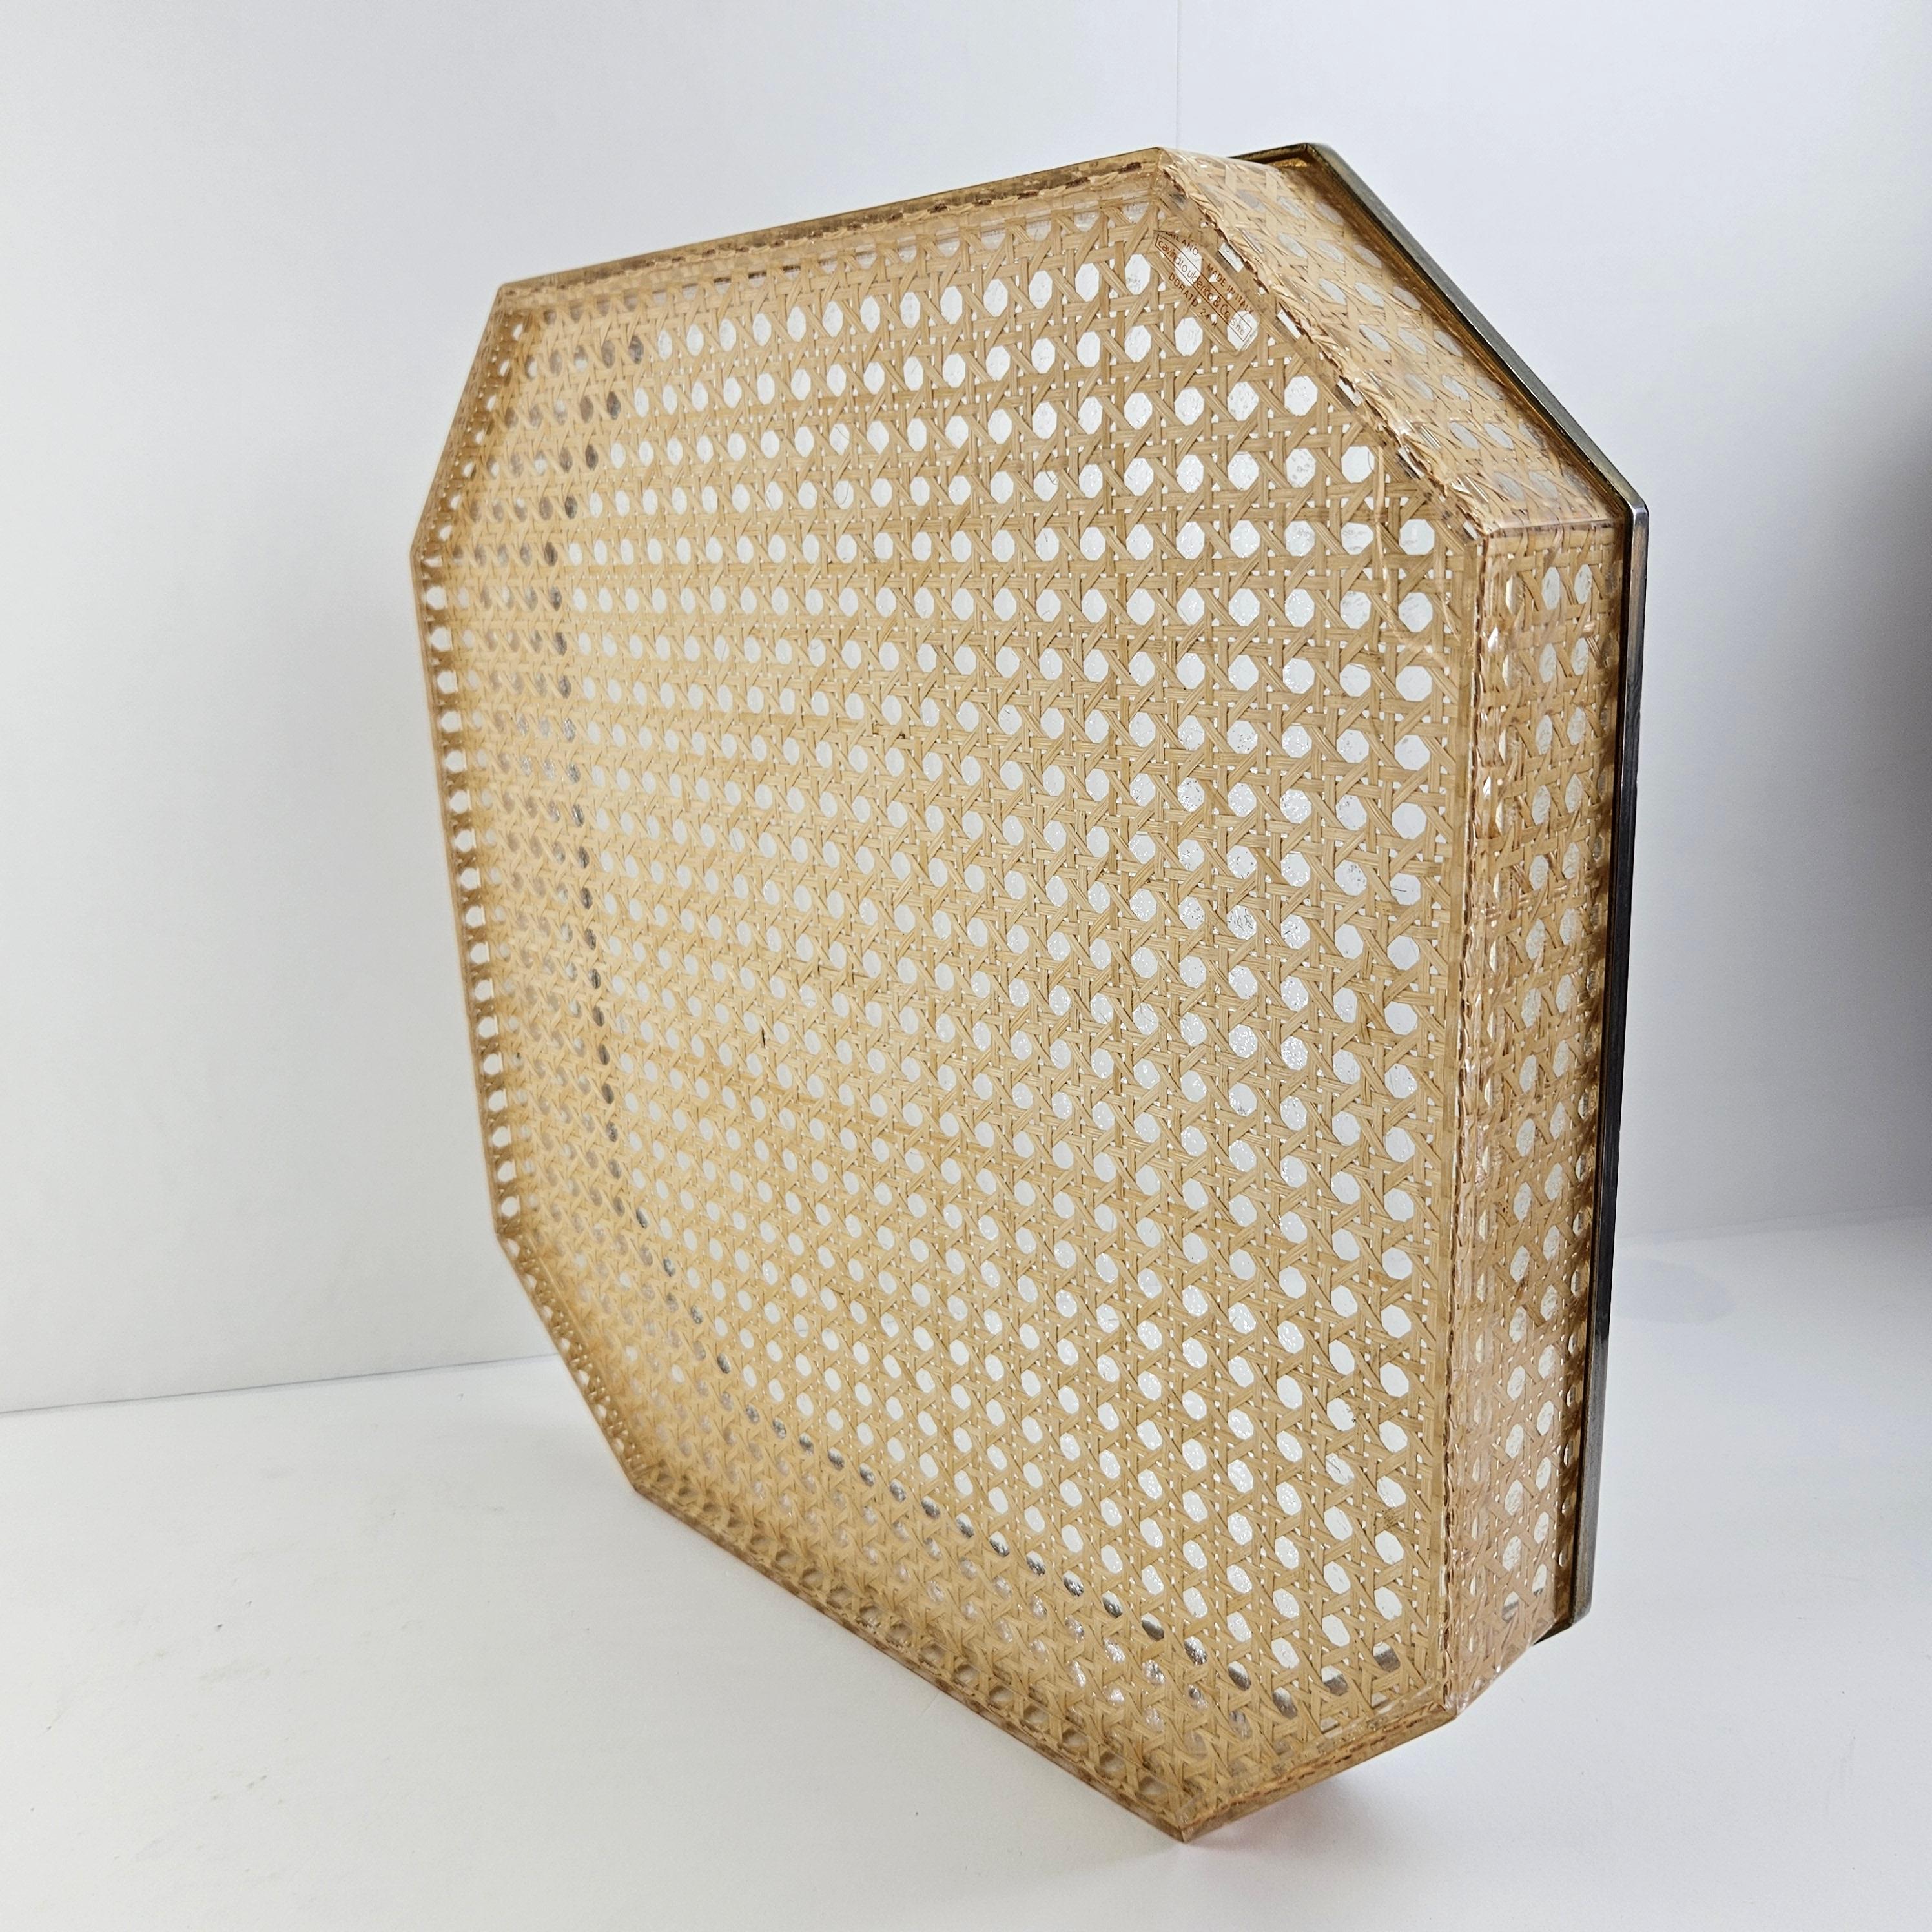 Serving Tray in Lucite, Rattan and 24k Gold, Italy 1970s For Sale 1